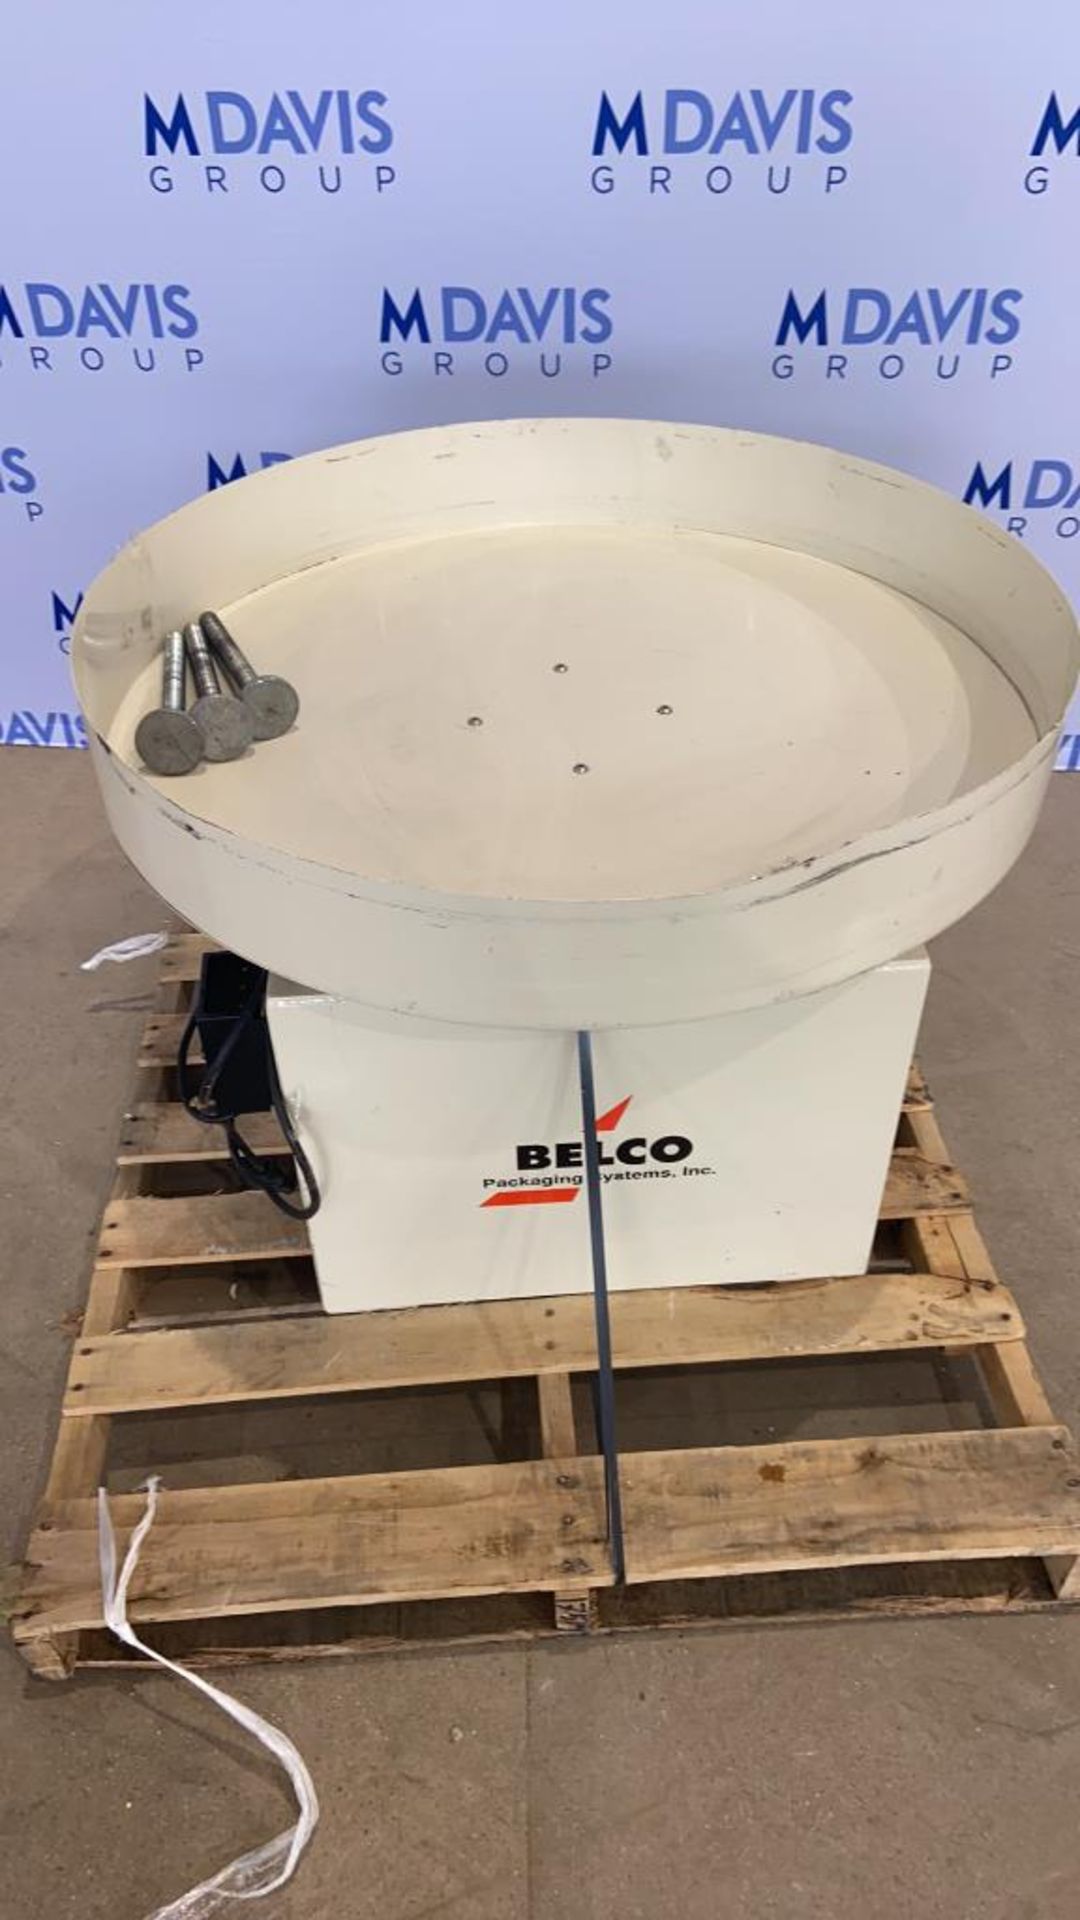 2018 Belco Packaging Systems Inc. 36" Dia. Accumulation Table, M/N BLS3605 S1A0, S/N 18-108, 120 - Image 8 of 8